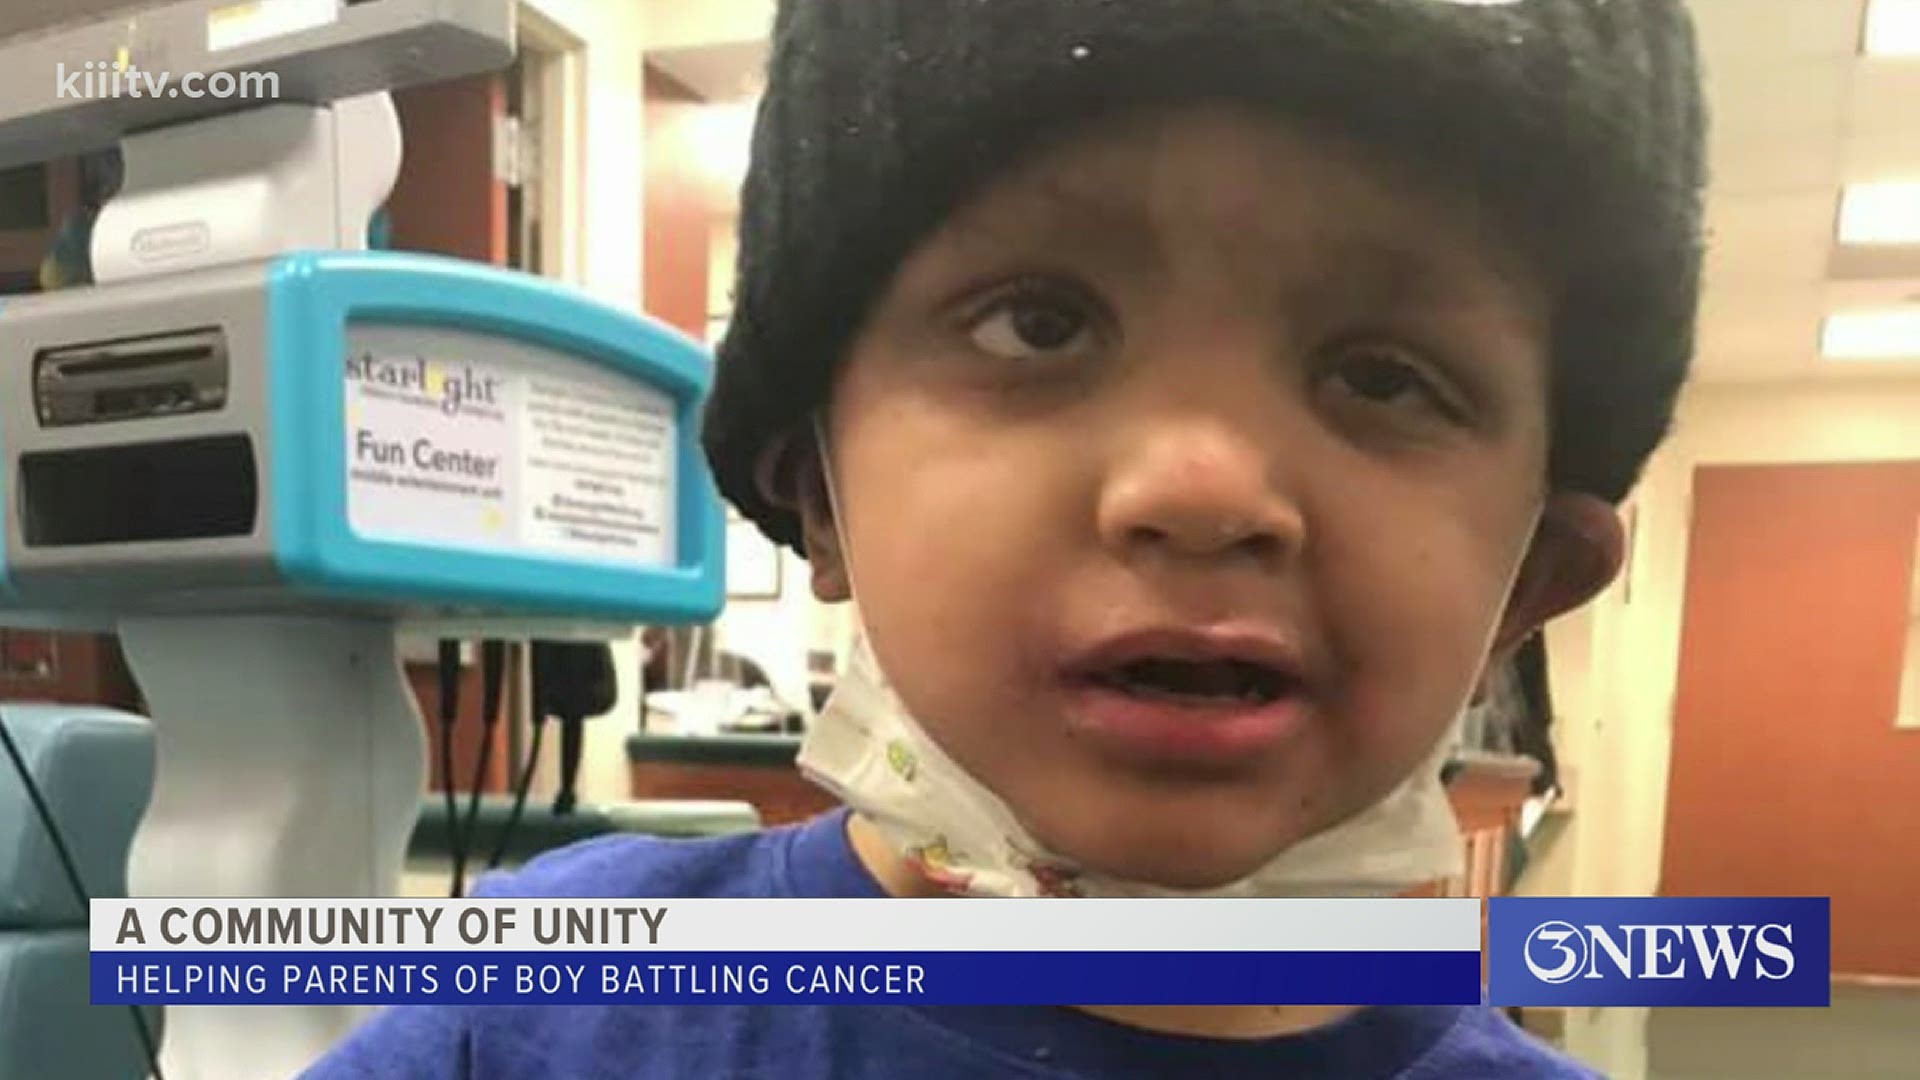 Sybastian has been fighting long hard battles against brain cancer for much of his young life.